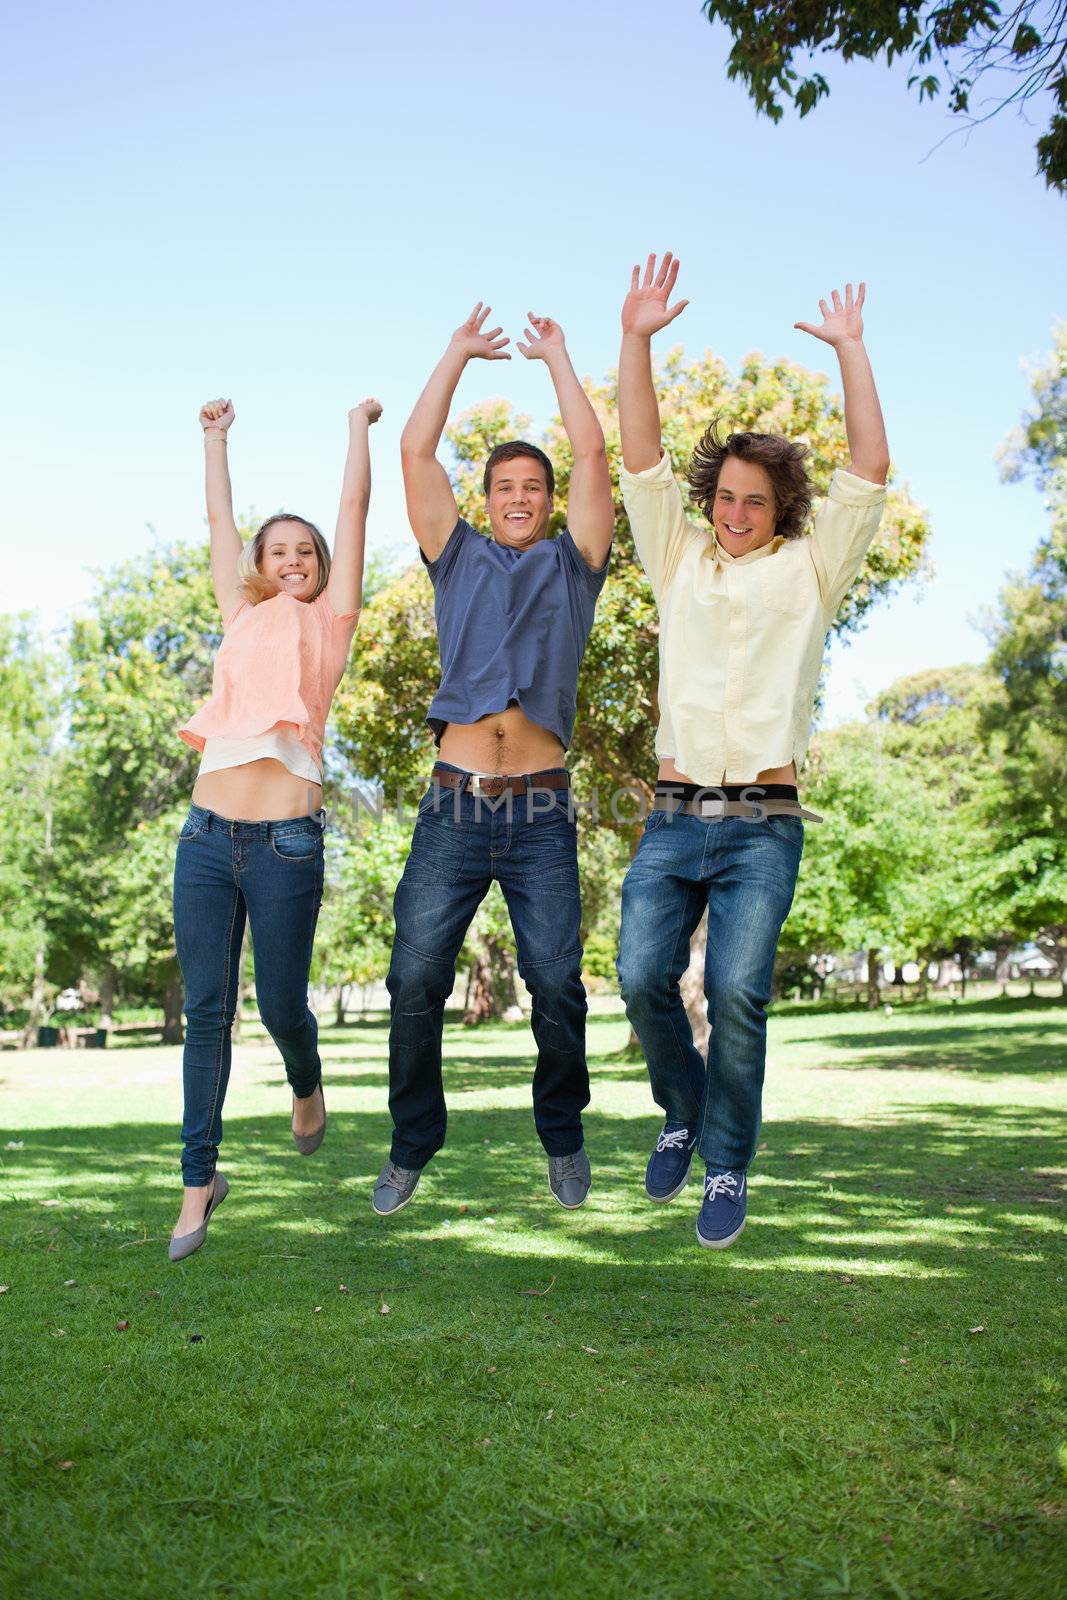 Three students jumping in a park